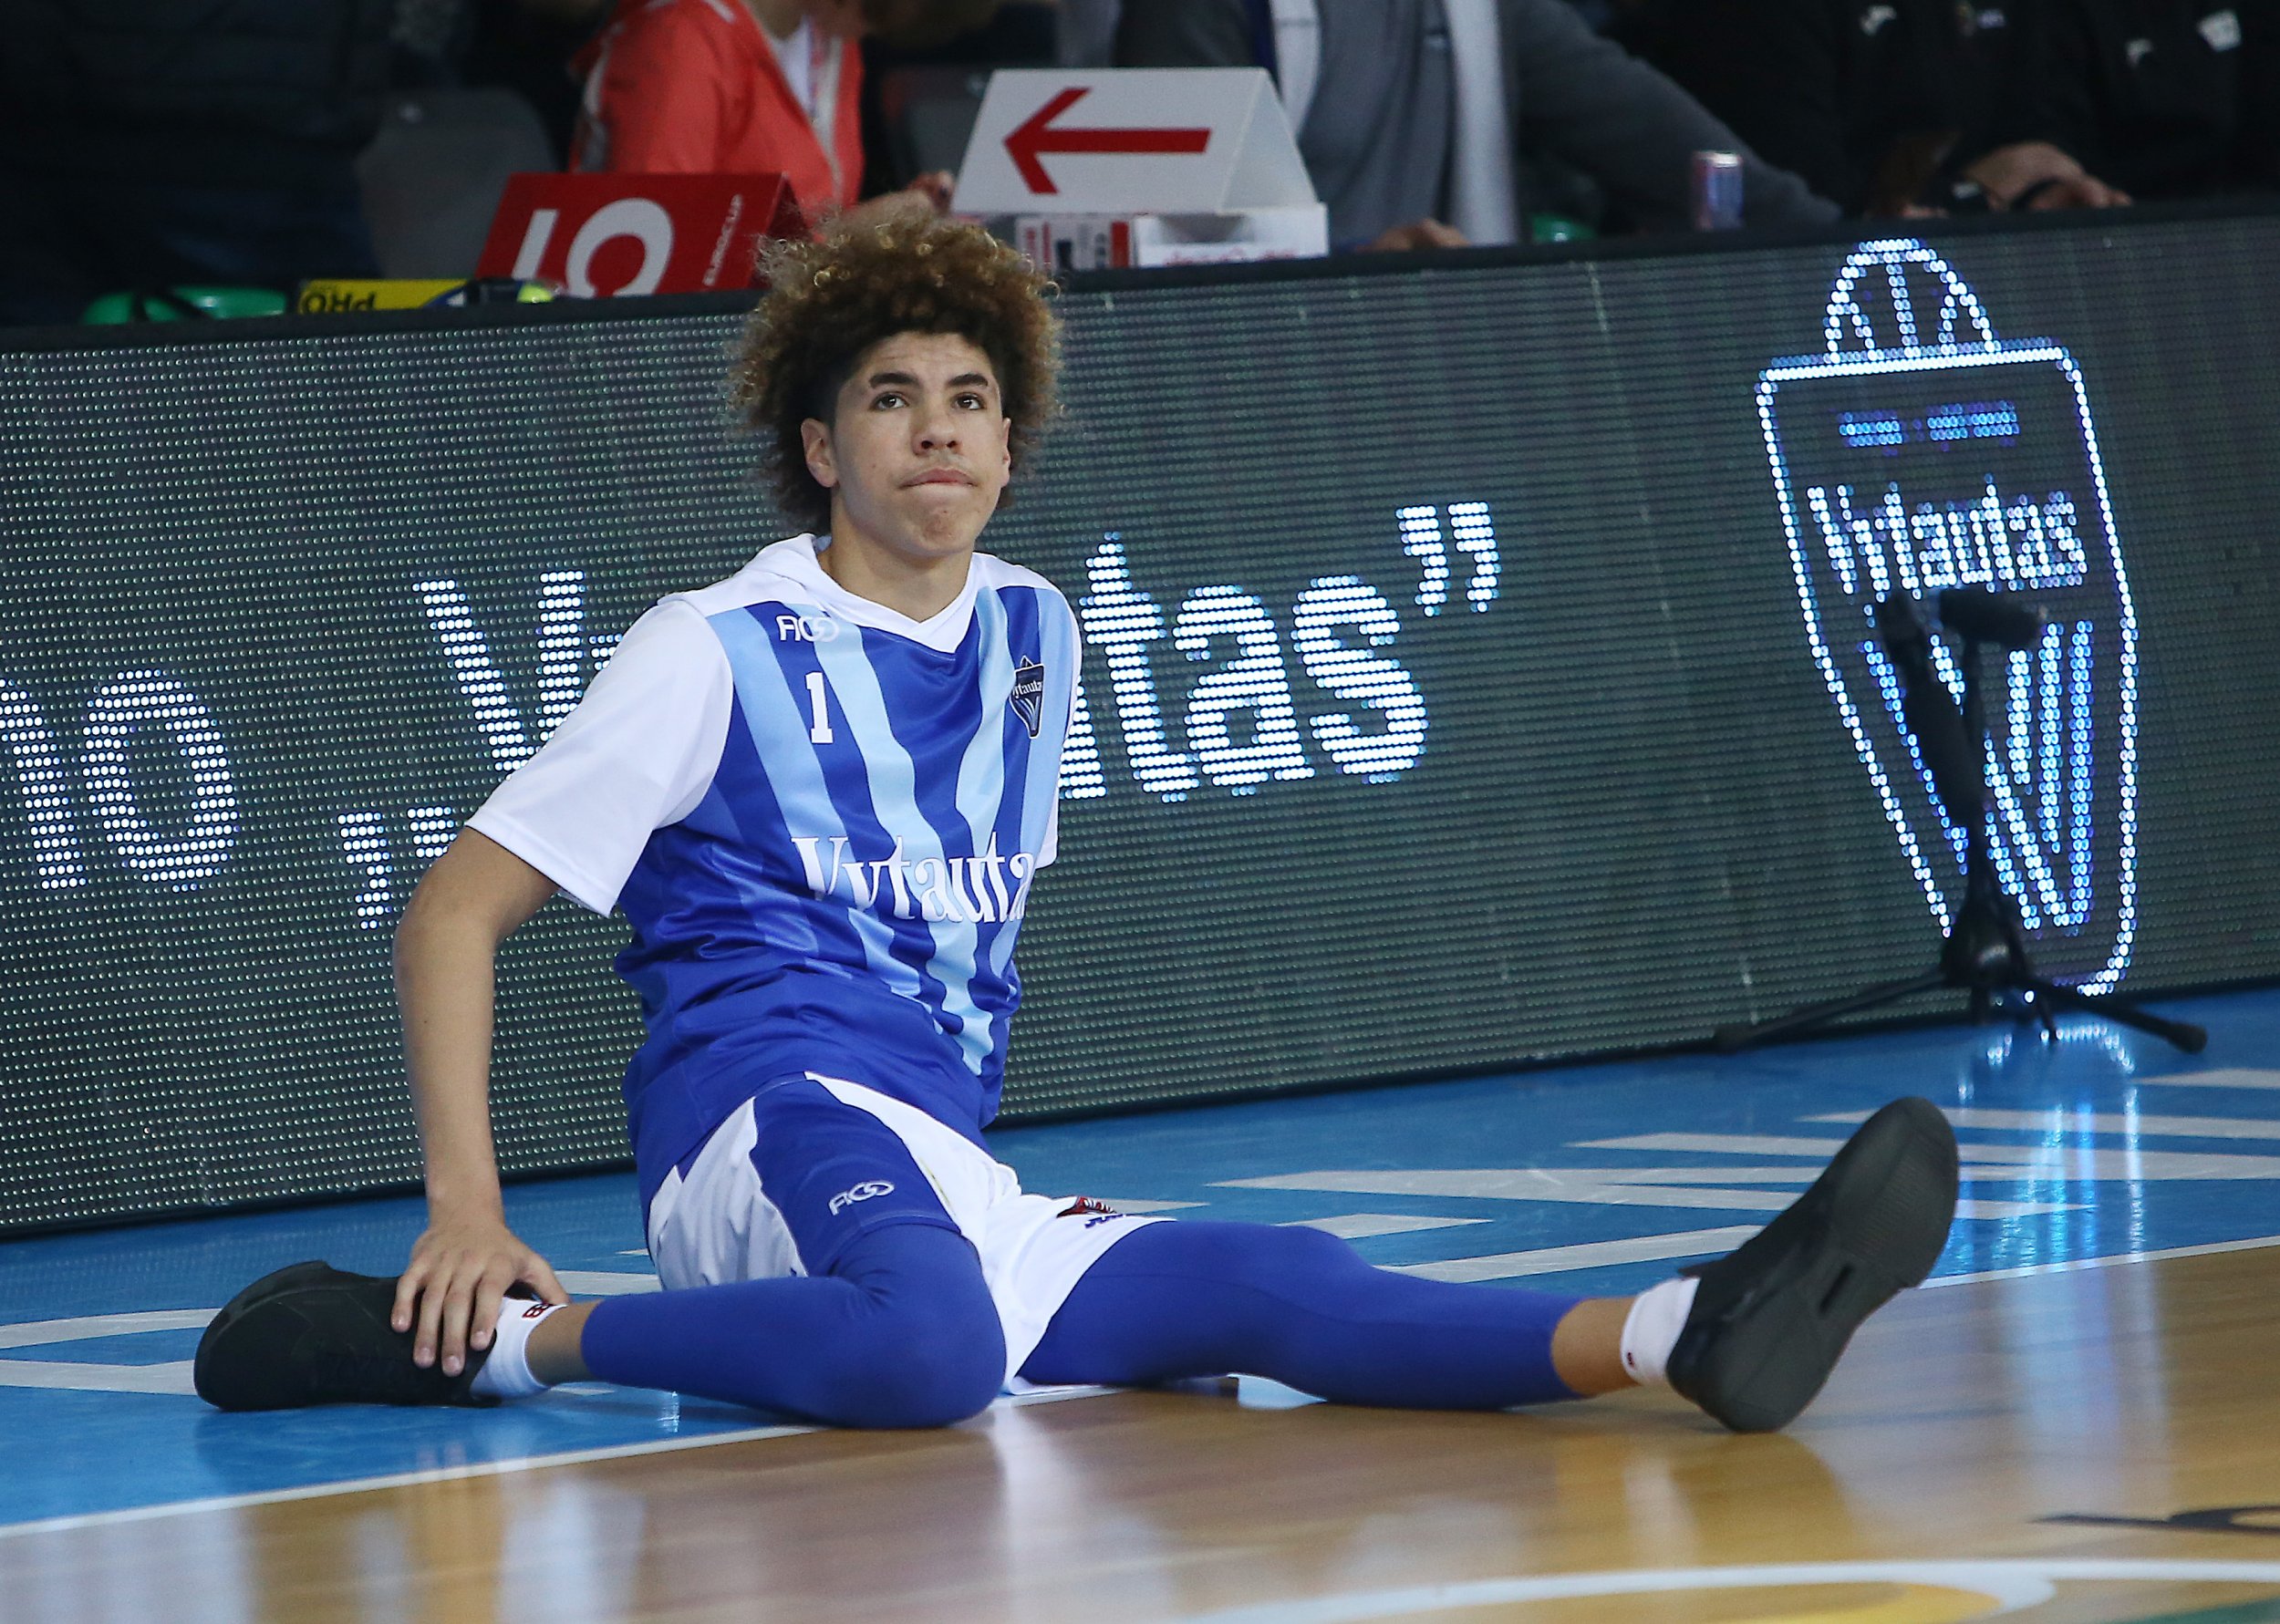 Video Lamelo Ball Sparks Brawl During Tour Match In Lithuania